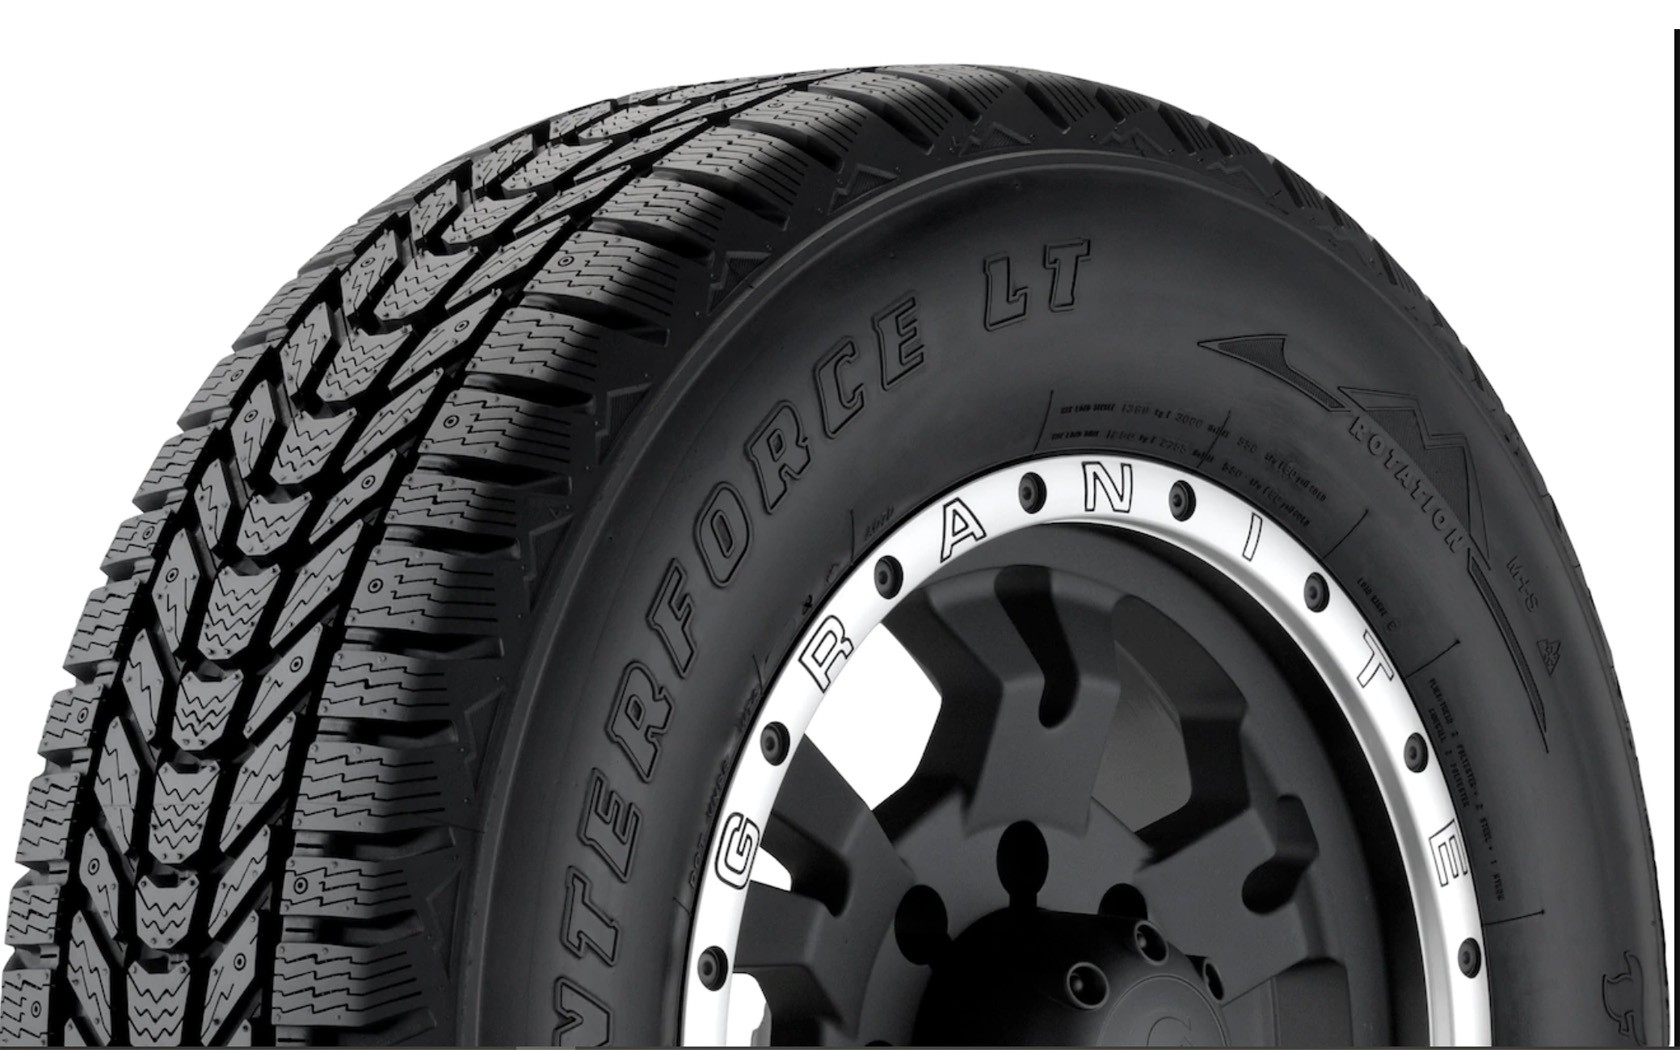 Check Out Five of the Best Winter Tires for Your Truck or SUV